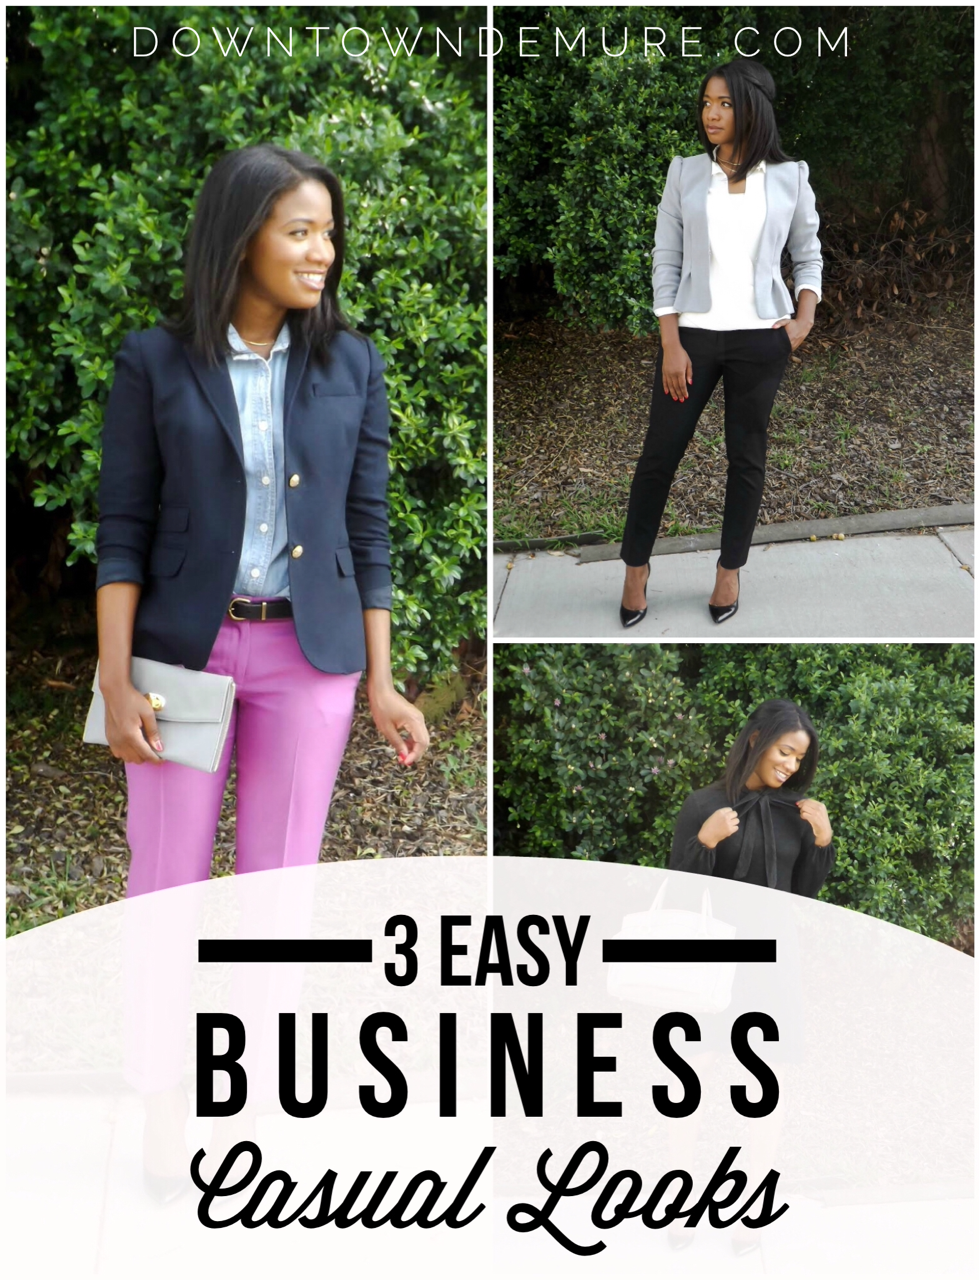 3 Easy Business Casual Looks to Try via Downtown Demure